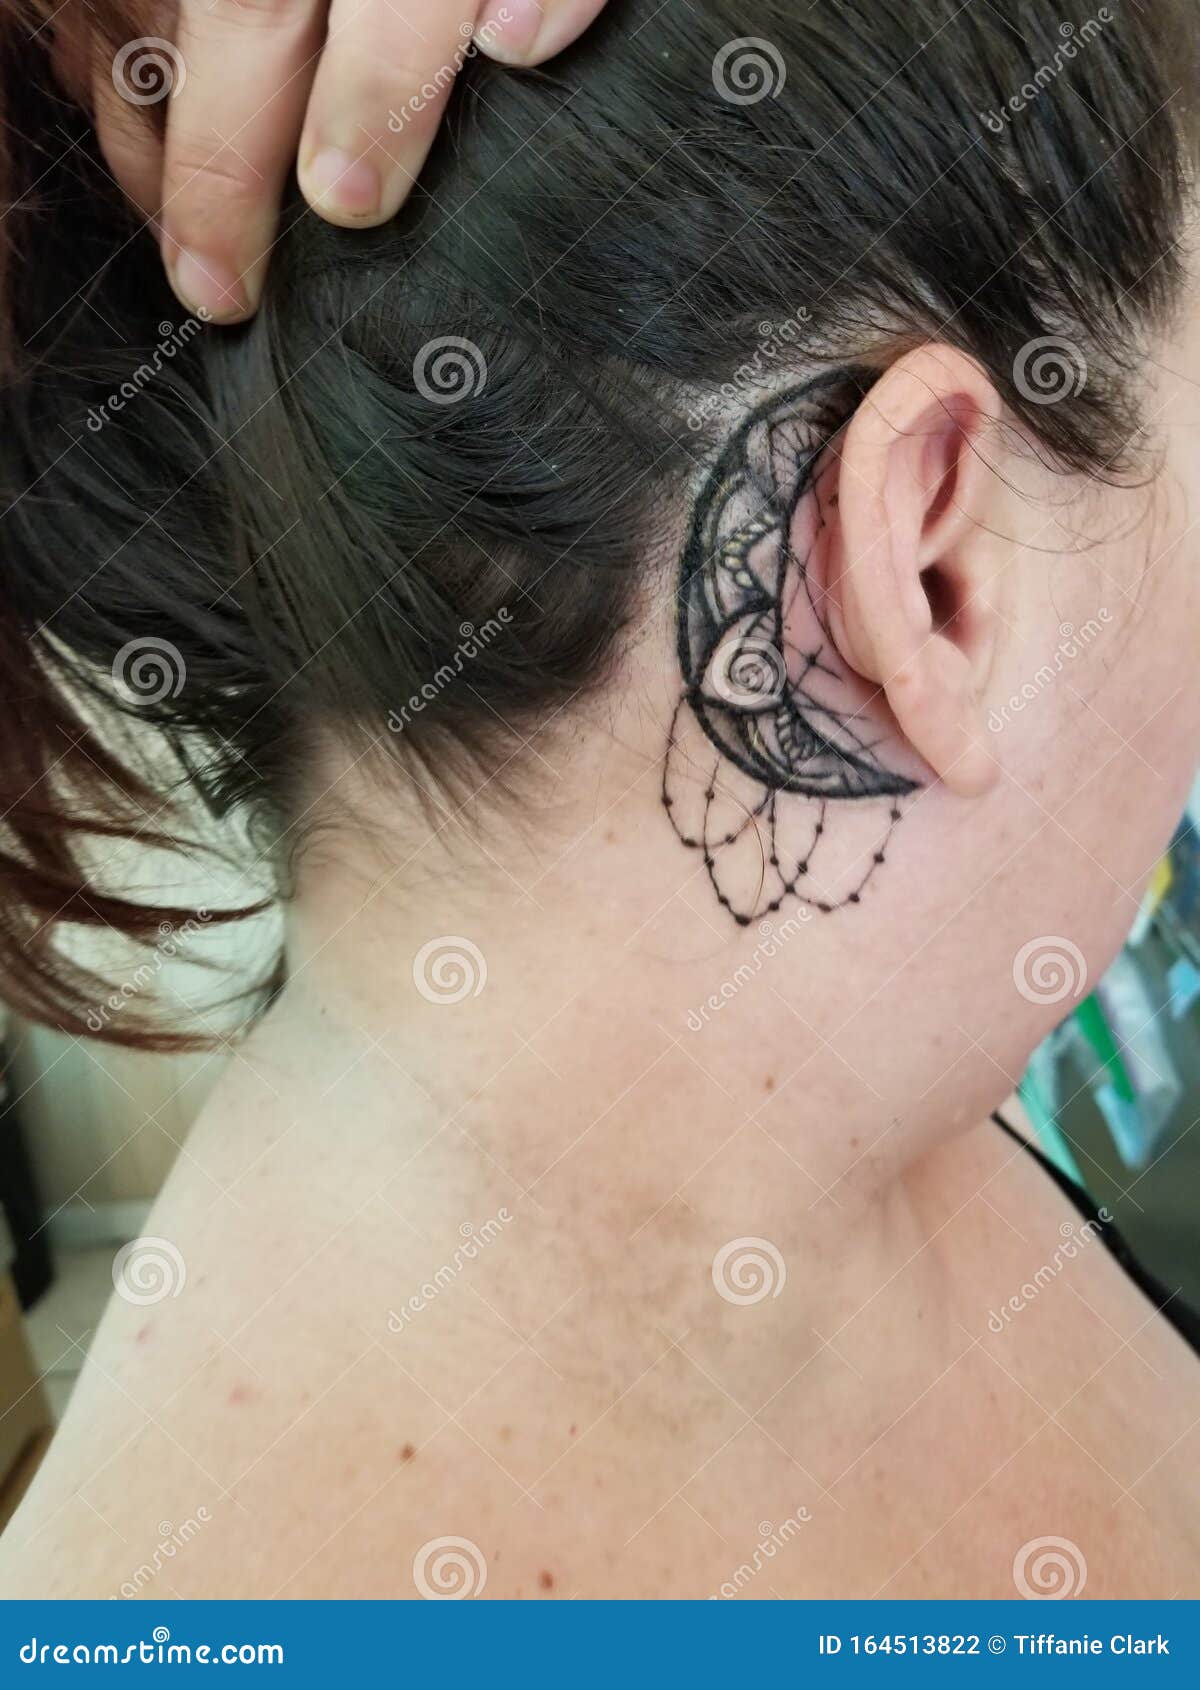 15 Behind the Ear Tattoo Ideas  Tiny Moon  Idea Wallpapers  iPhone  WallpapersColor Schemes